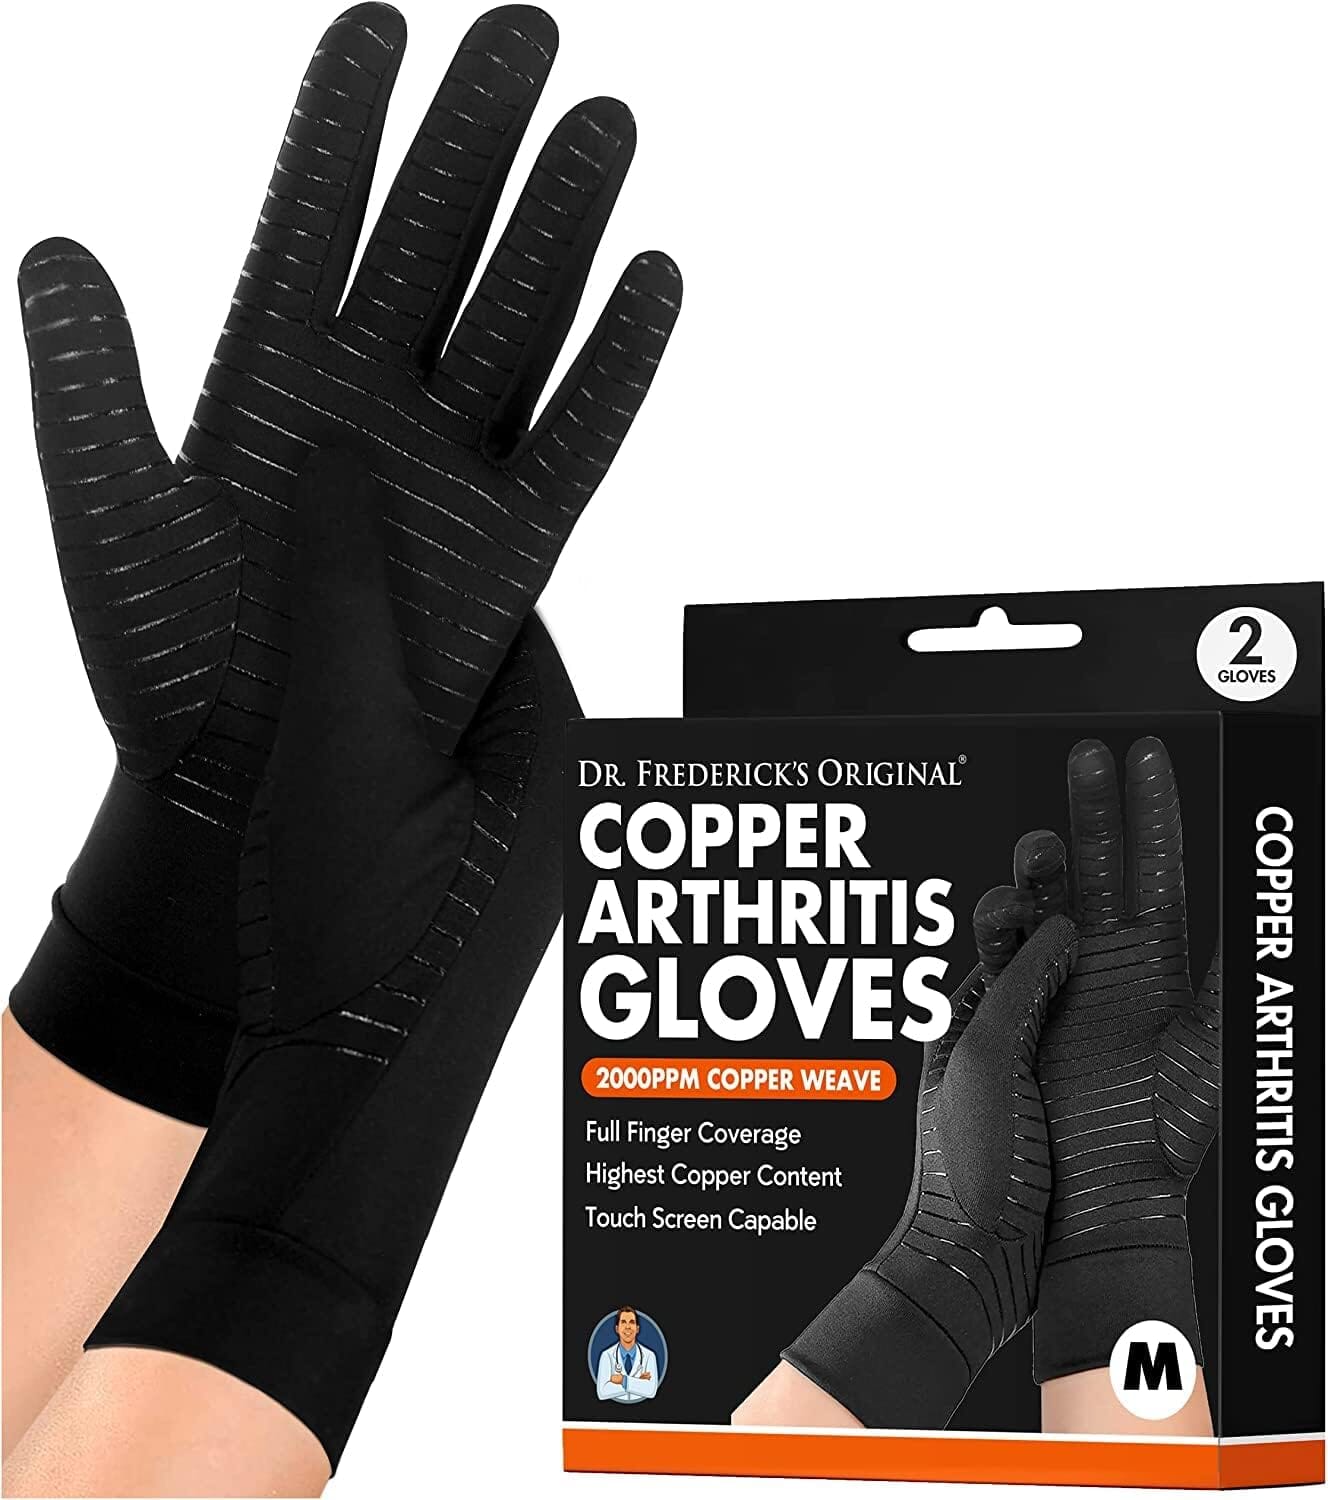 Dr. Frederick's Original Copper Full Finger Arthritis Glove - 2 Gloves - Perfect Computer and Phone Typing Gloves - Fit Guaranteed Hand Pain Dr. Frederick's Original Medium 